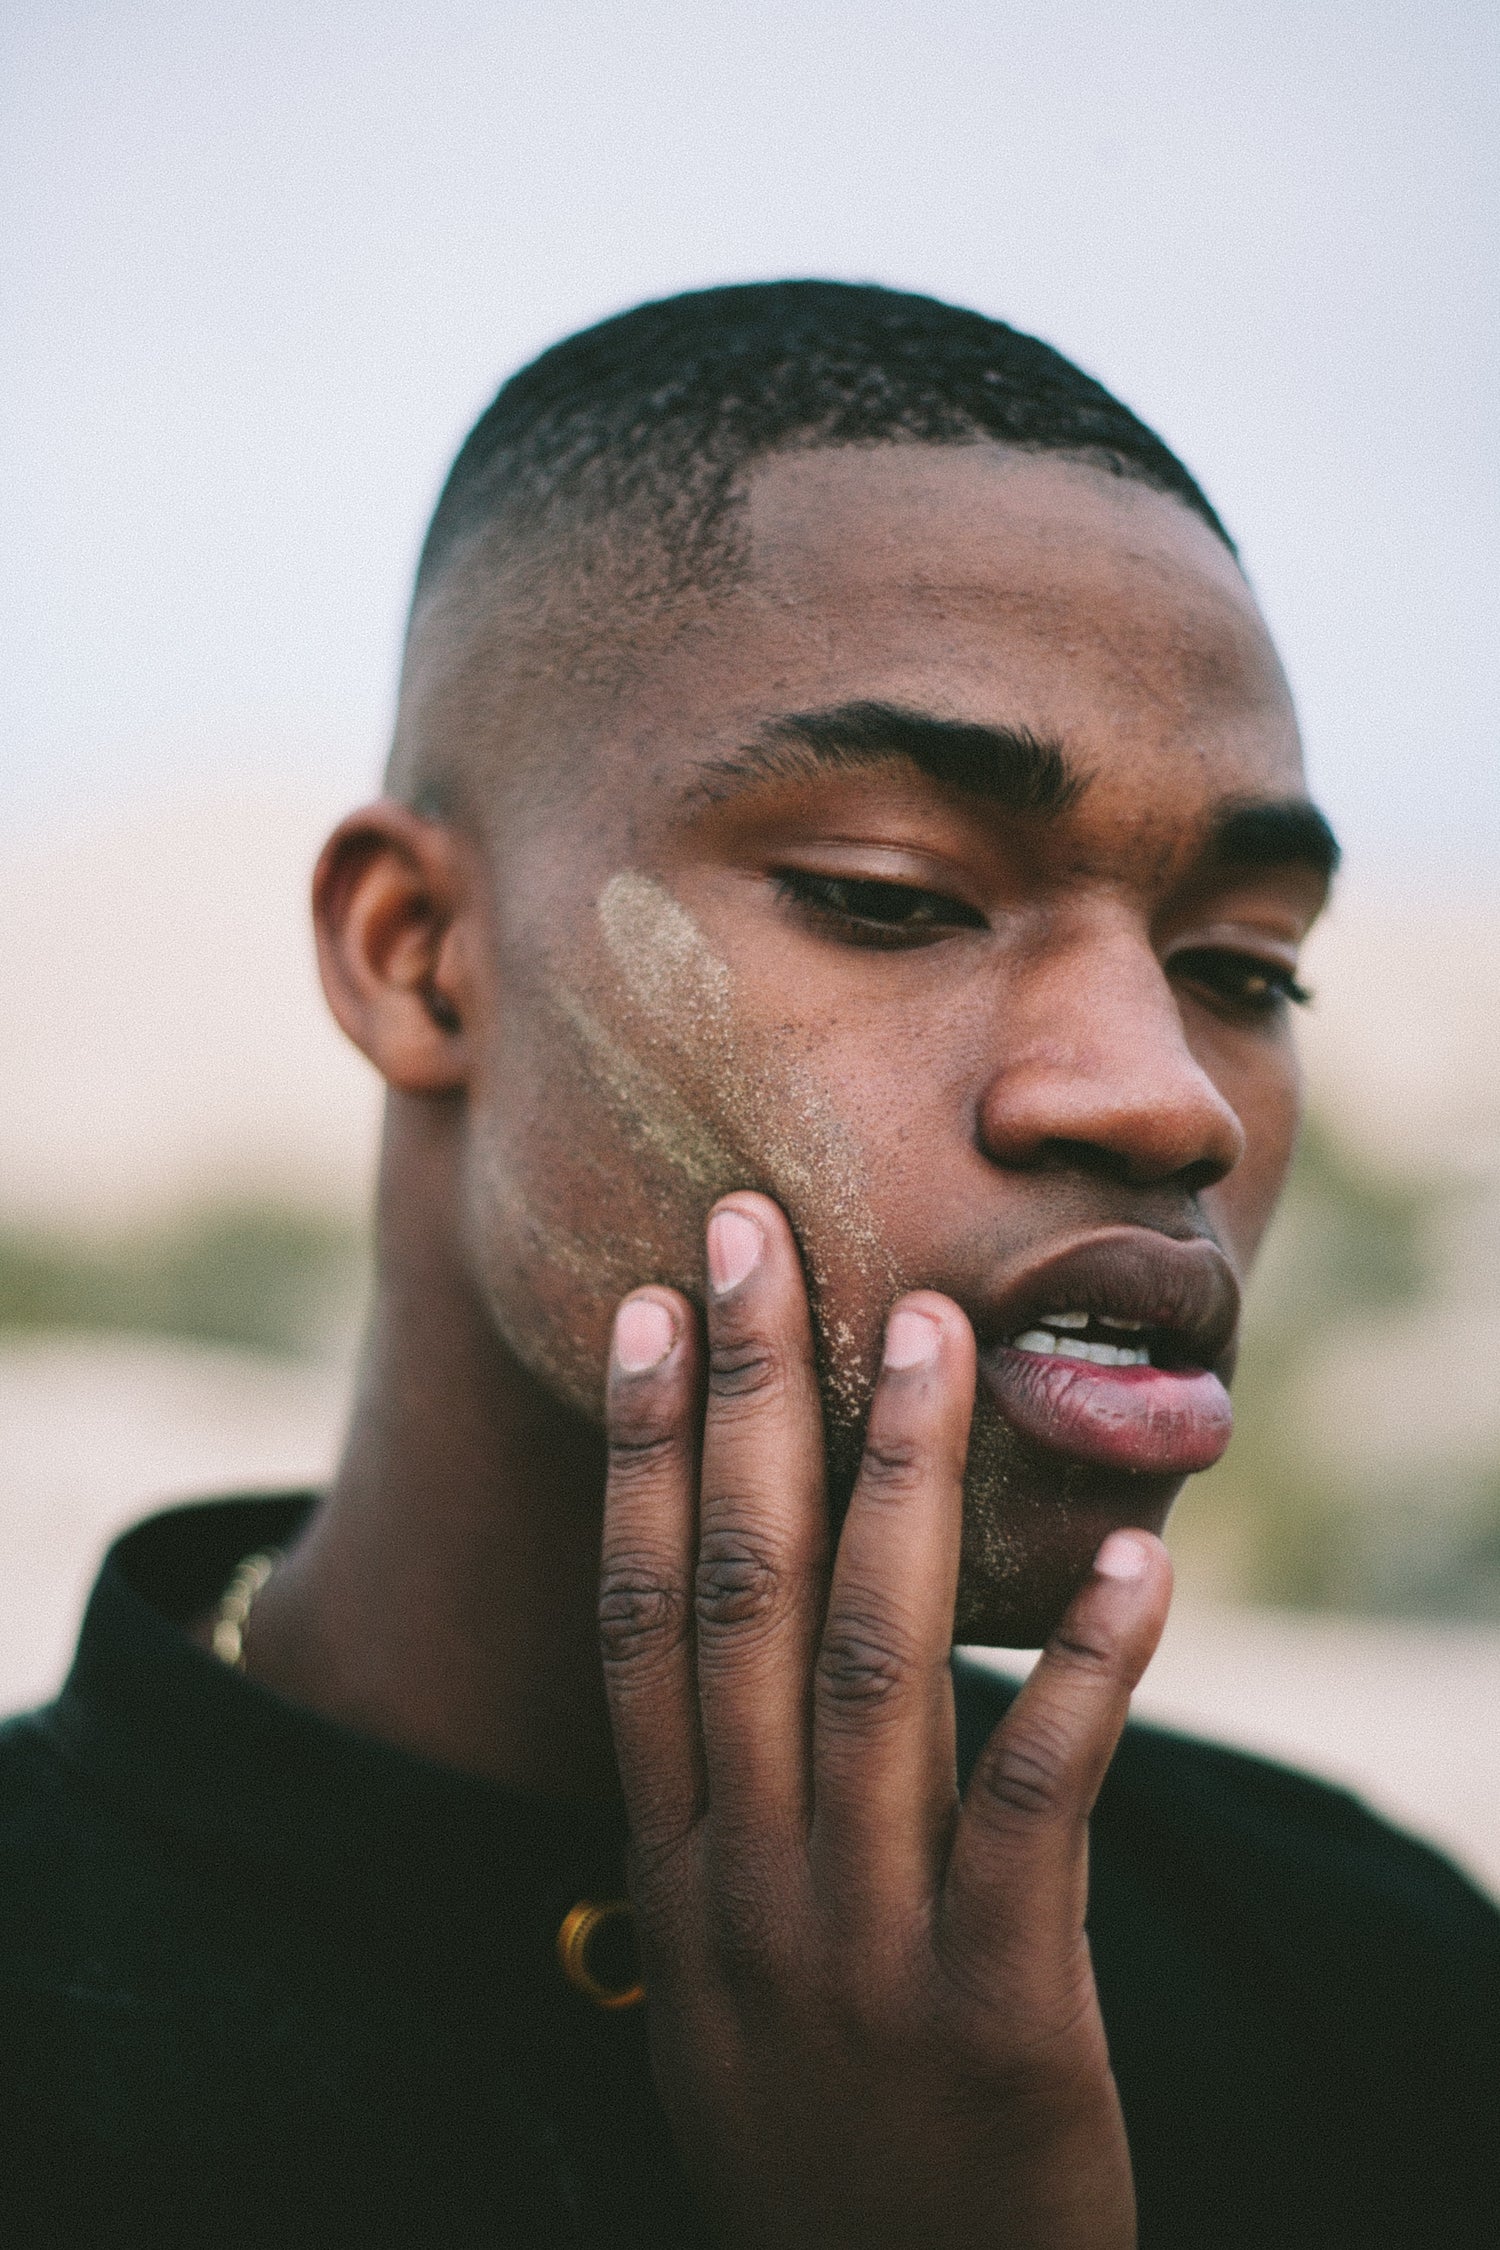 Prevent Acne From Forming On Your Skin! Tips For Preventative Skin Care For Men